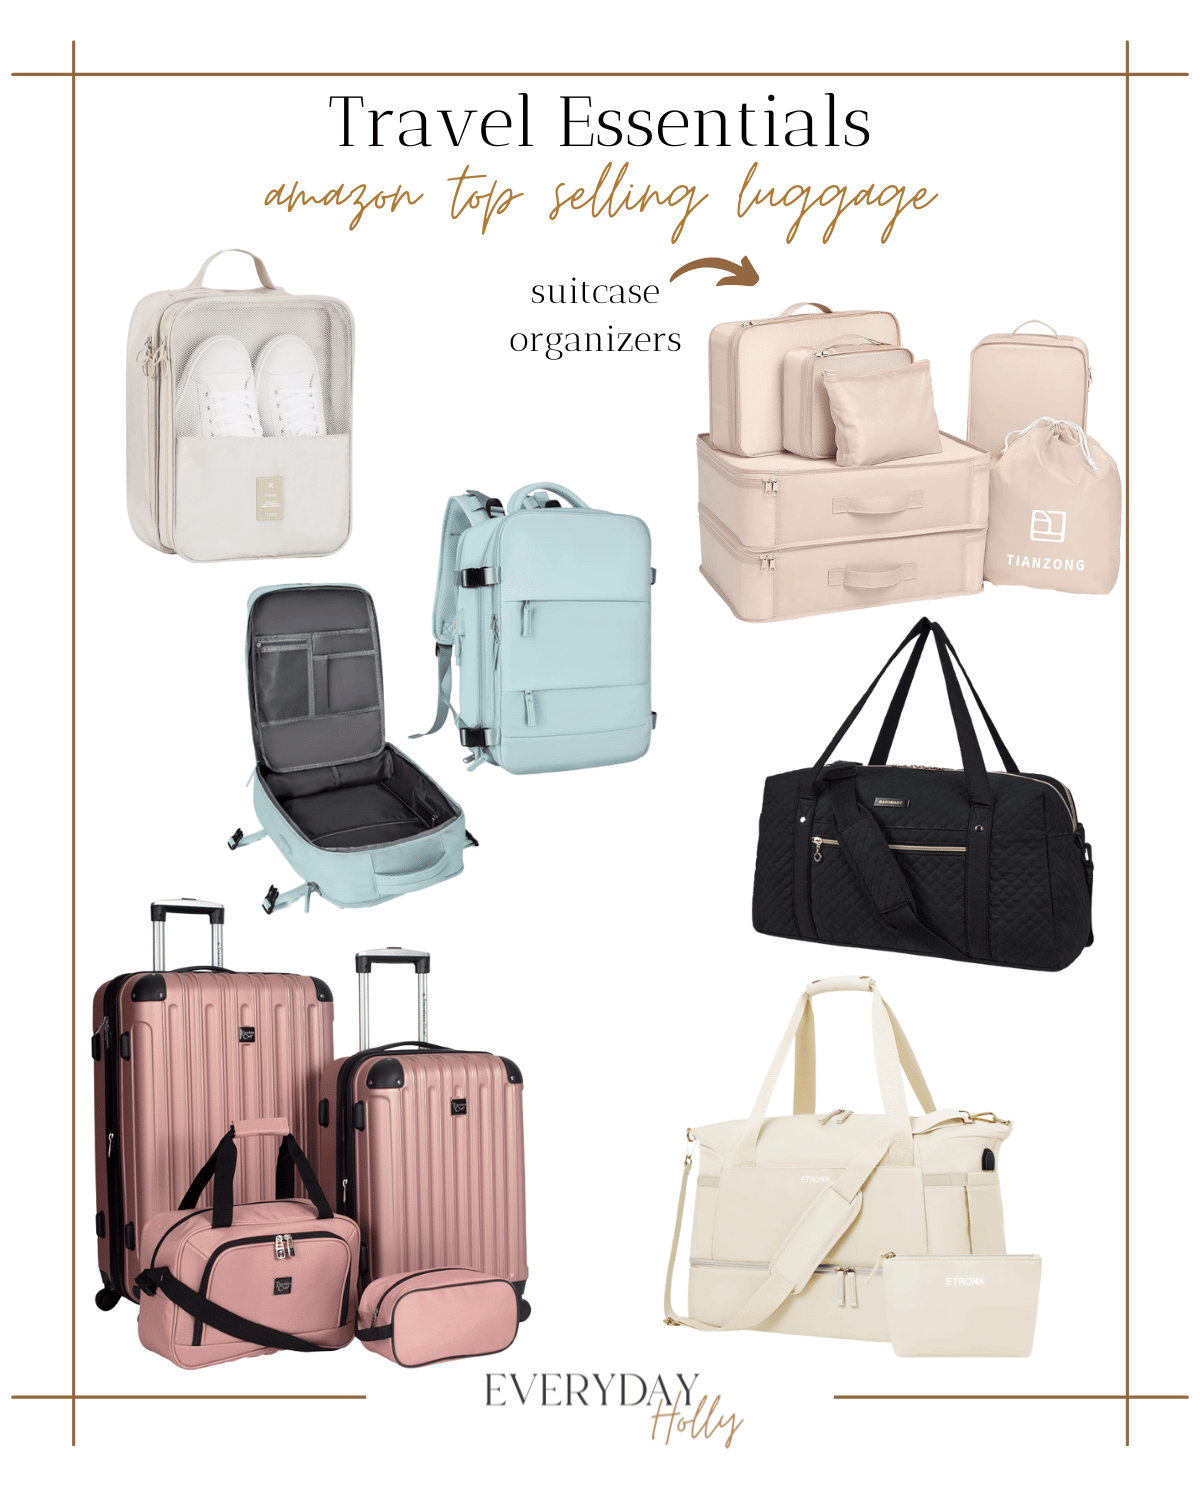 luggage, travel essentials, amazon luggage, luggage sets, duffel bags, suitcase organizers, shoe holders